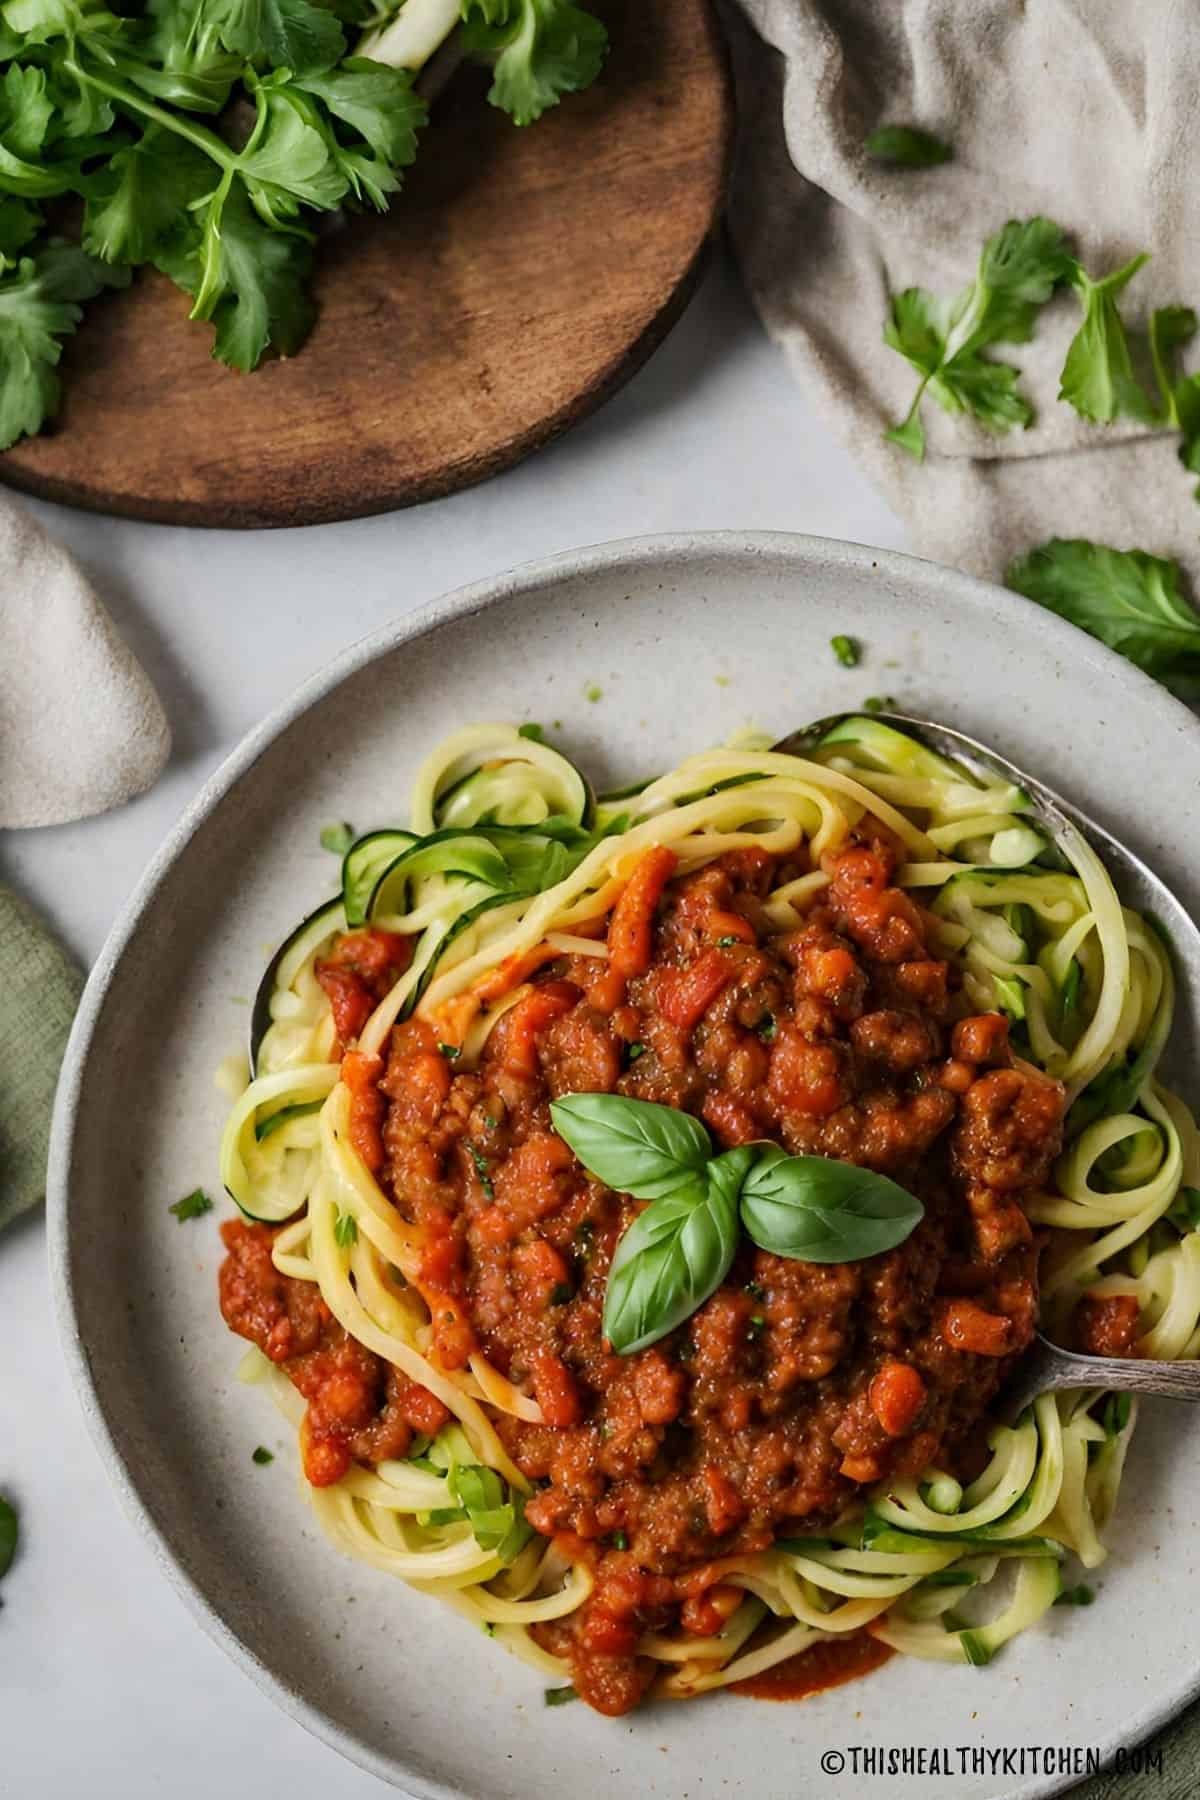 Zucchini noodles with vegan bolognese sauce on top.